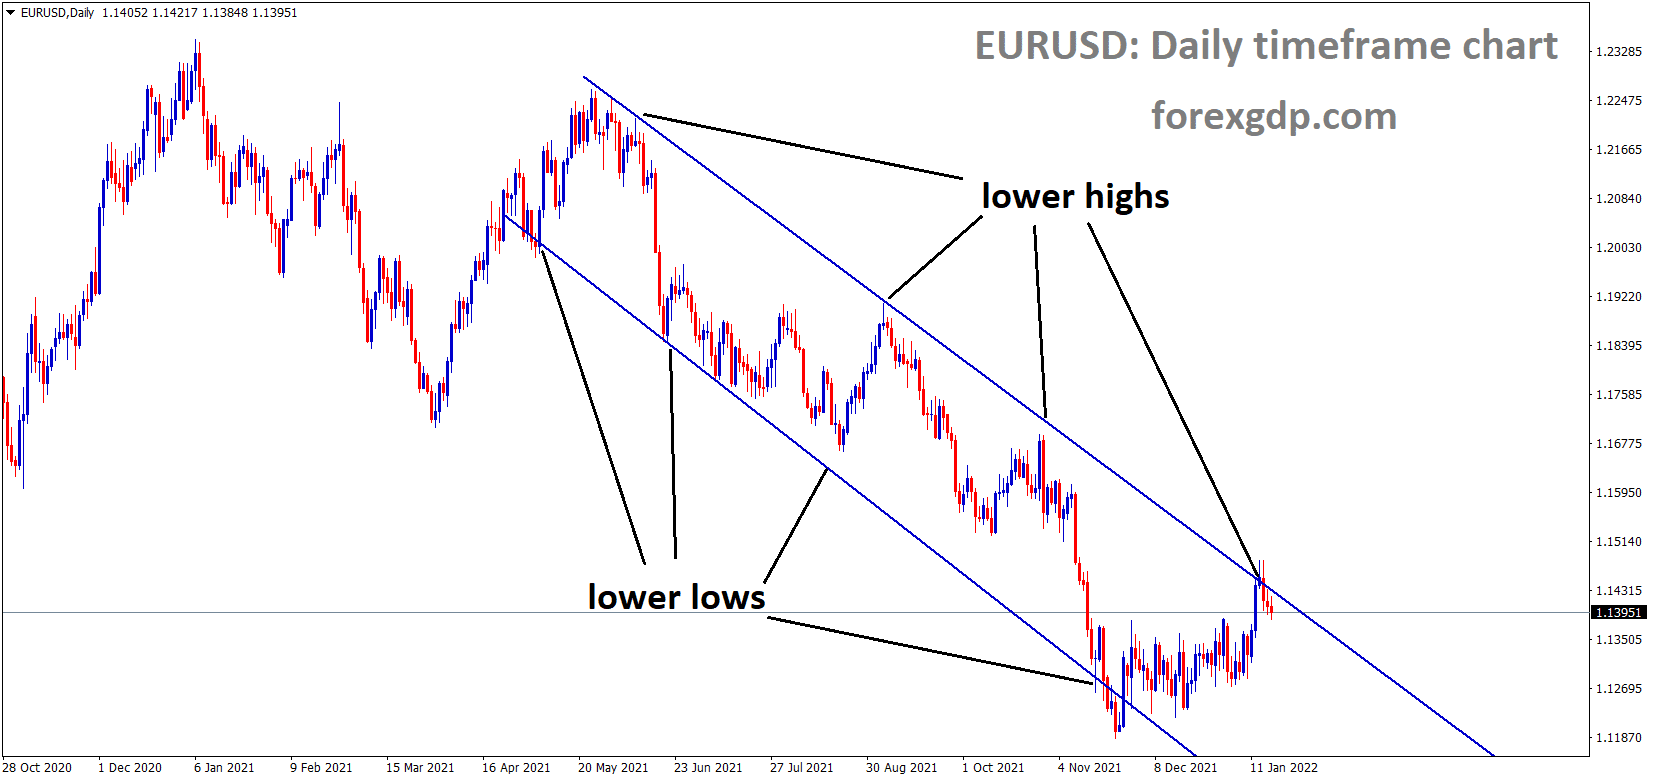 EURUSD is moving in the Descending channel and the market has fallen from the Lower high area of the channel